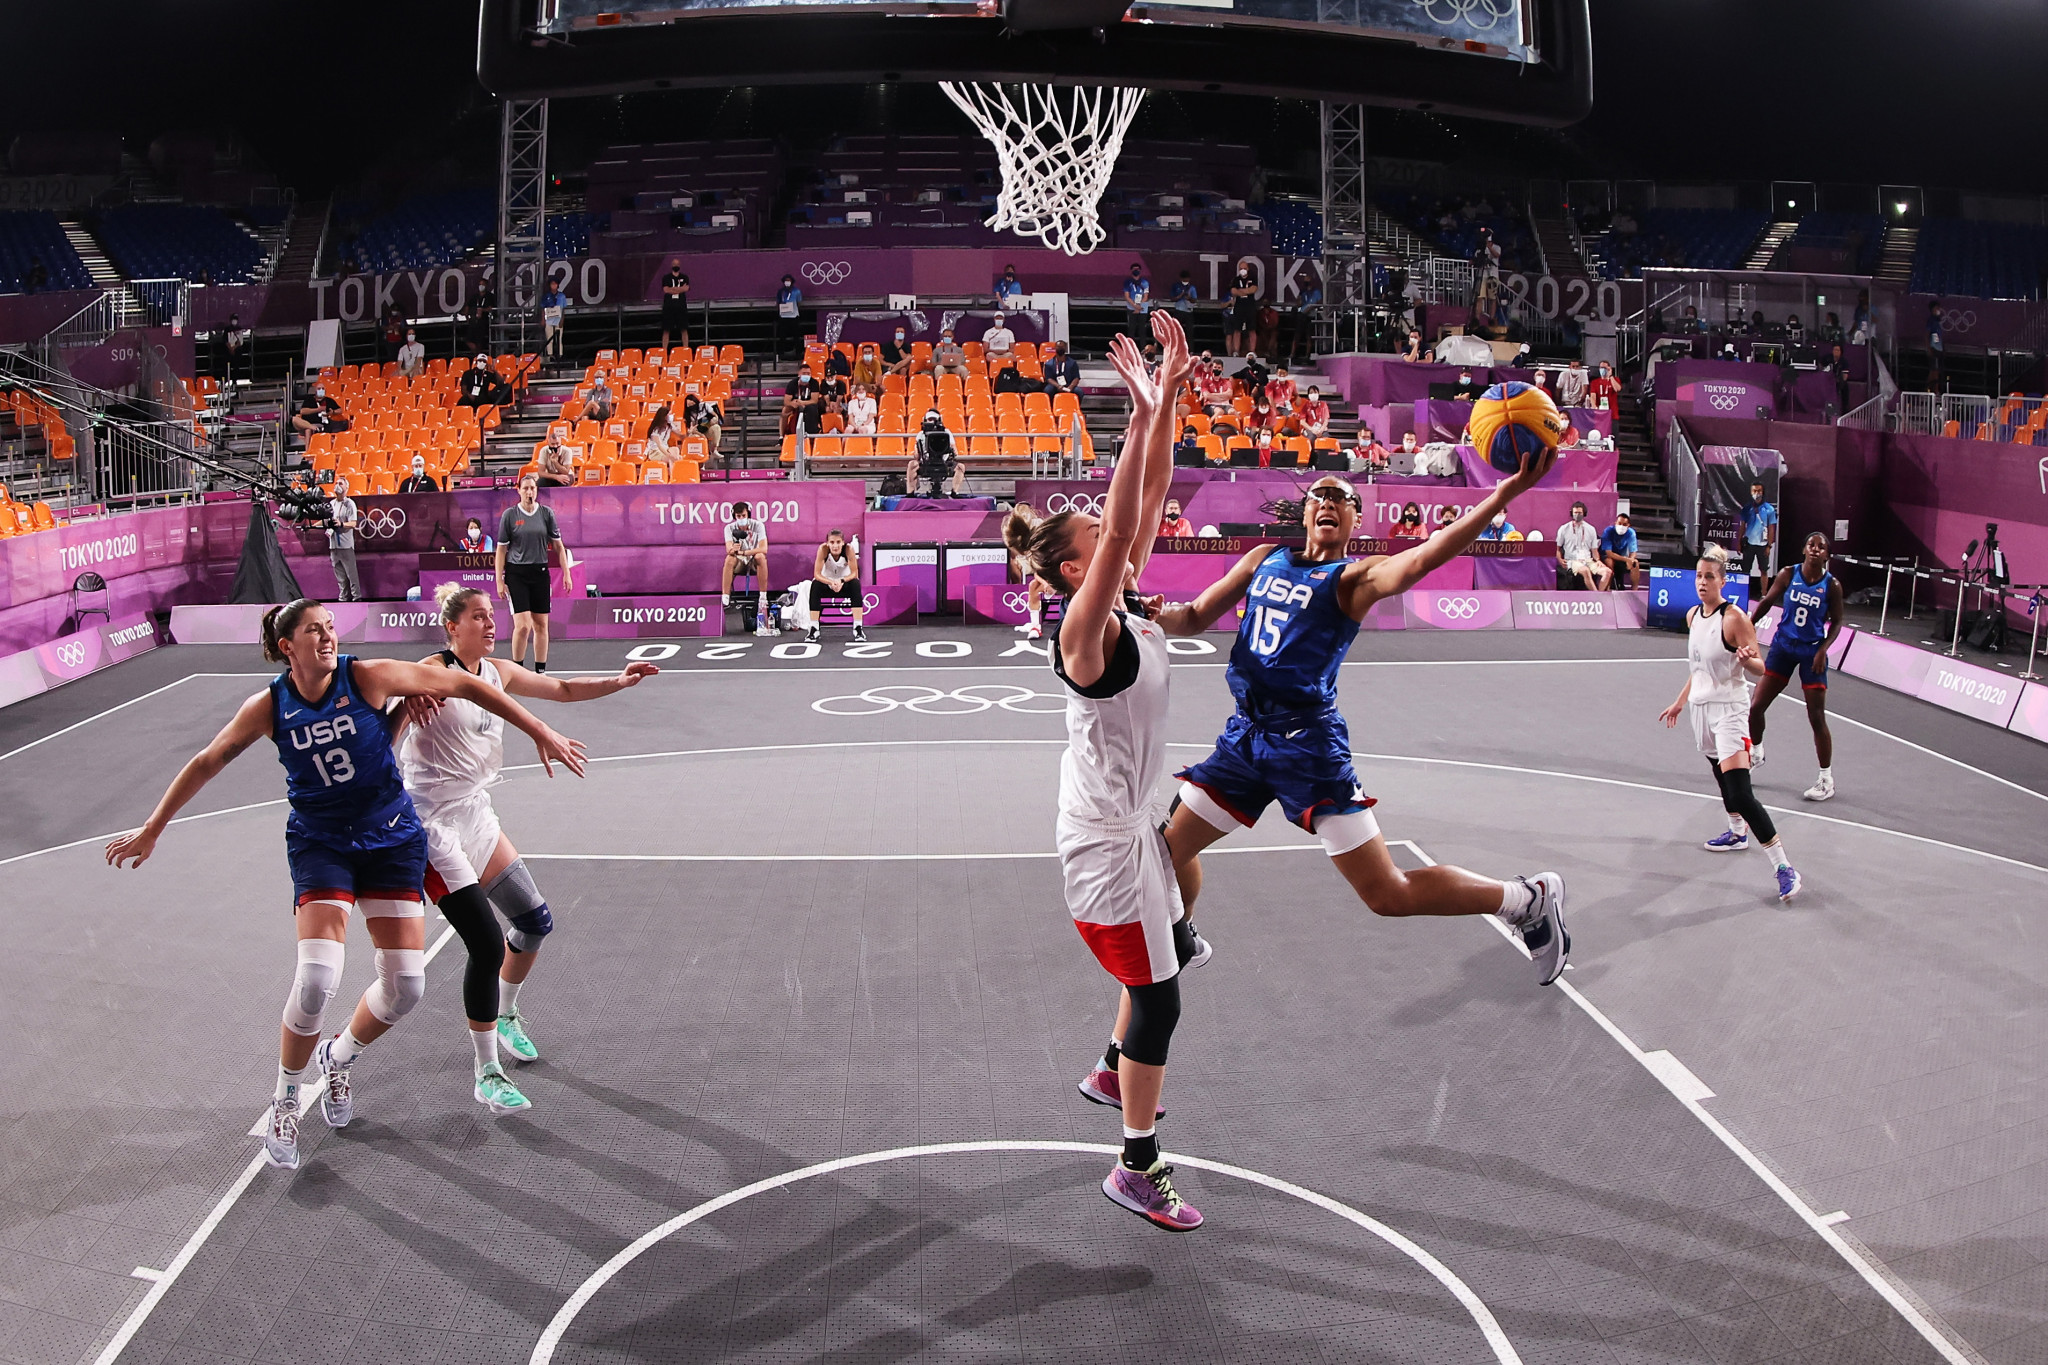 Tokyo 2020 witnessed the successful debut of 3x3 basketball ©Getty Images